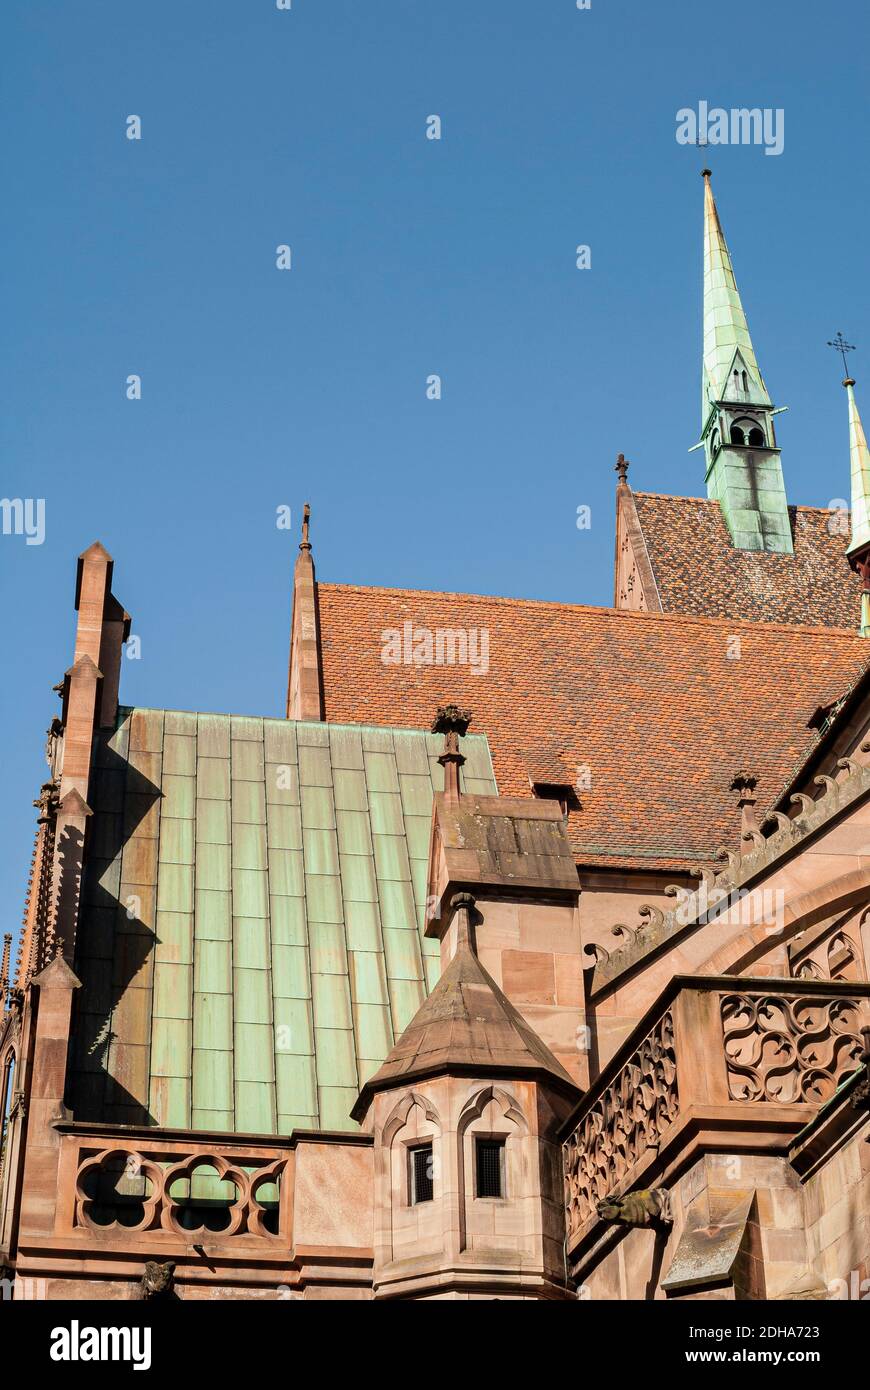 Partial view of the Saint-Pierre-le-Jeune church in Strasbourg, France Stock Photo